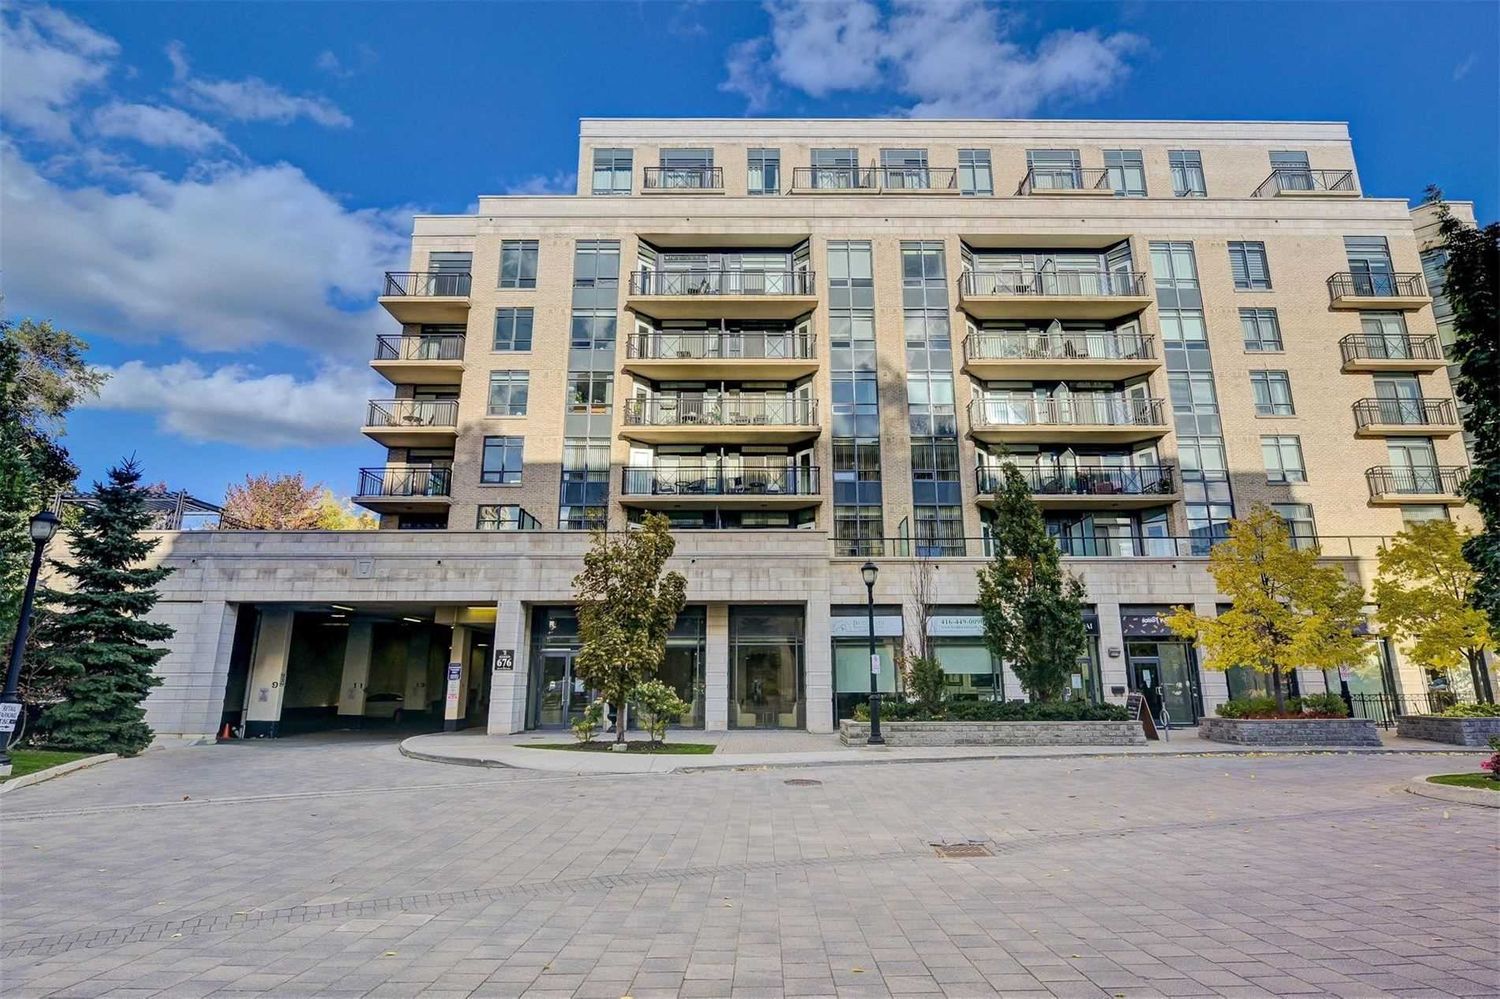 676 Sheppard Avenue East. St Gabriel Manor Condos is located in  North York, Toronto - image #2 of 3